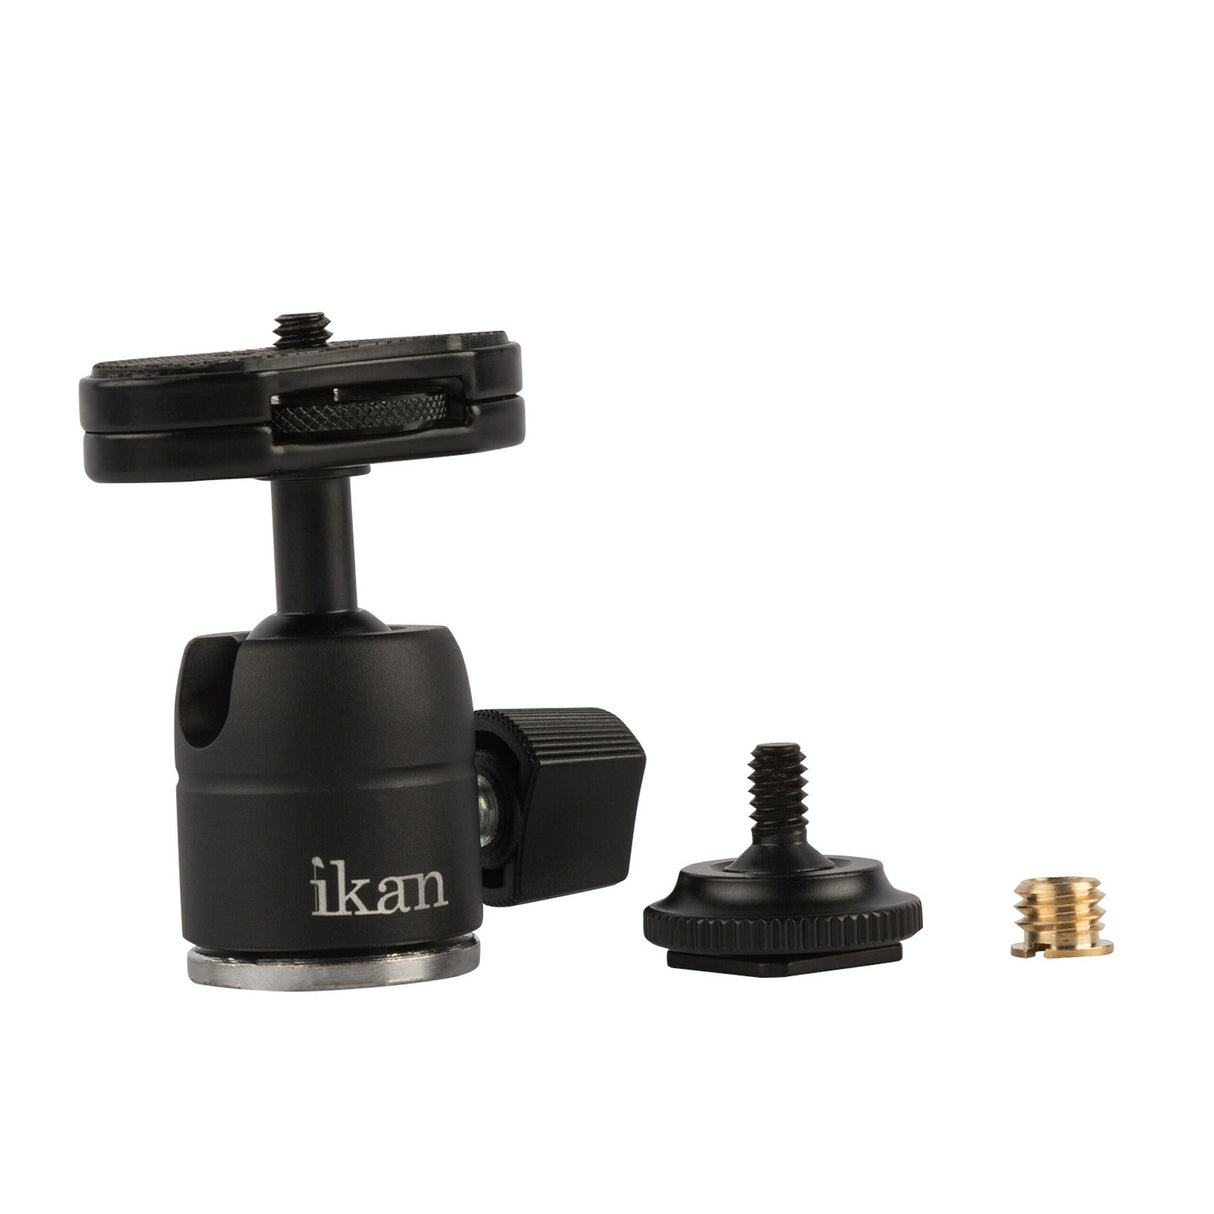 E-Image SM-202 Easy-Grip Heavy Duty 1/4-20 Shoe Mount with Tool-Less Mounting Screw